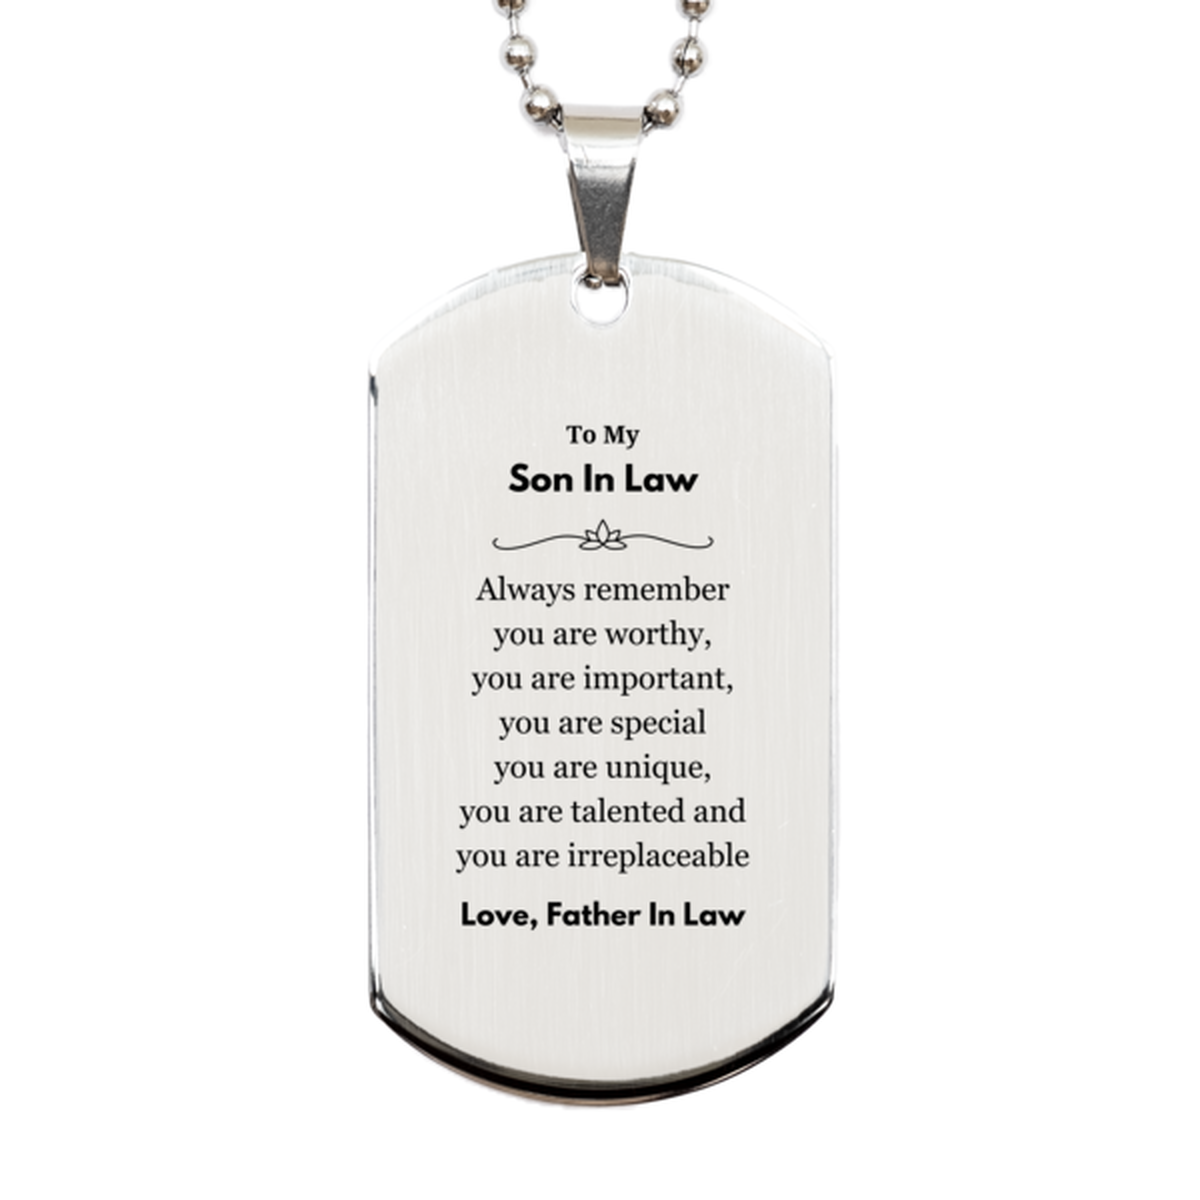 Son In Law Birthday Gifts from Father In Law, Inspirational Silver Dog Tag for Son In Law Christmas Graduation Gifts for Son In Law Always remember you are worthy, you are important. Love, Father In Law